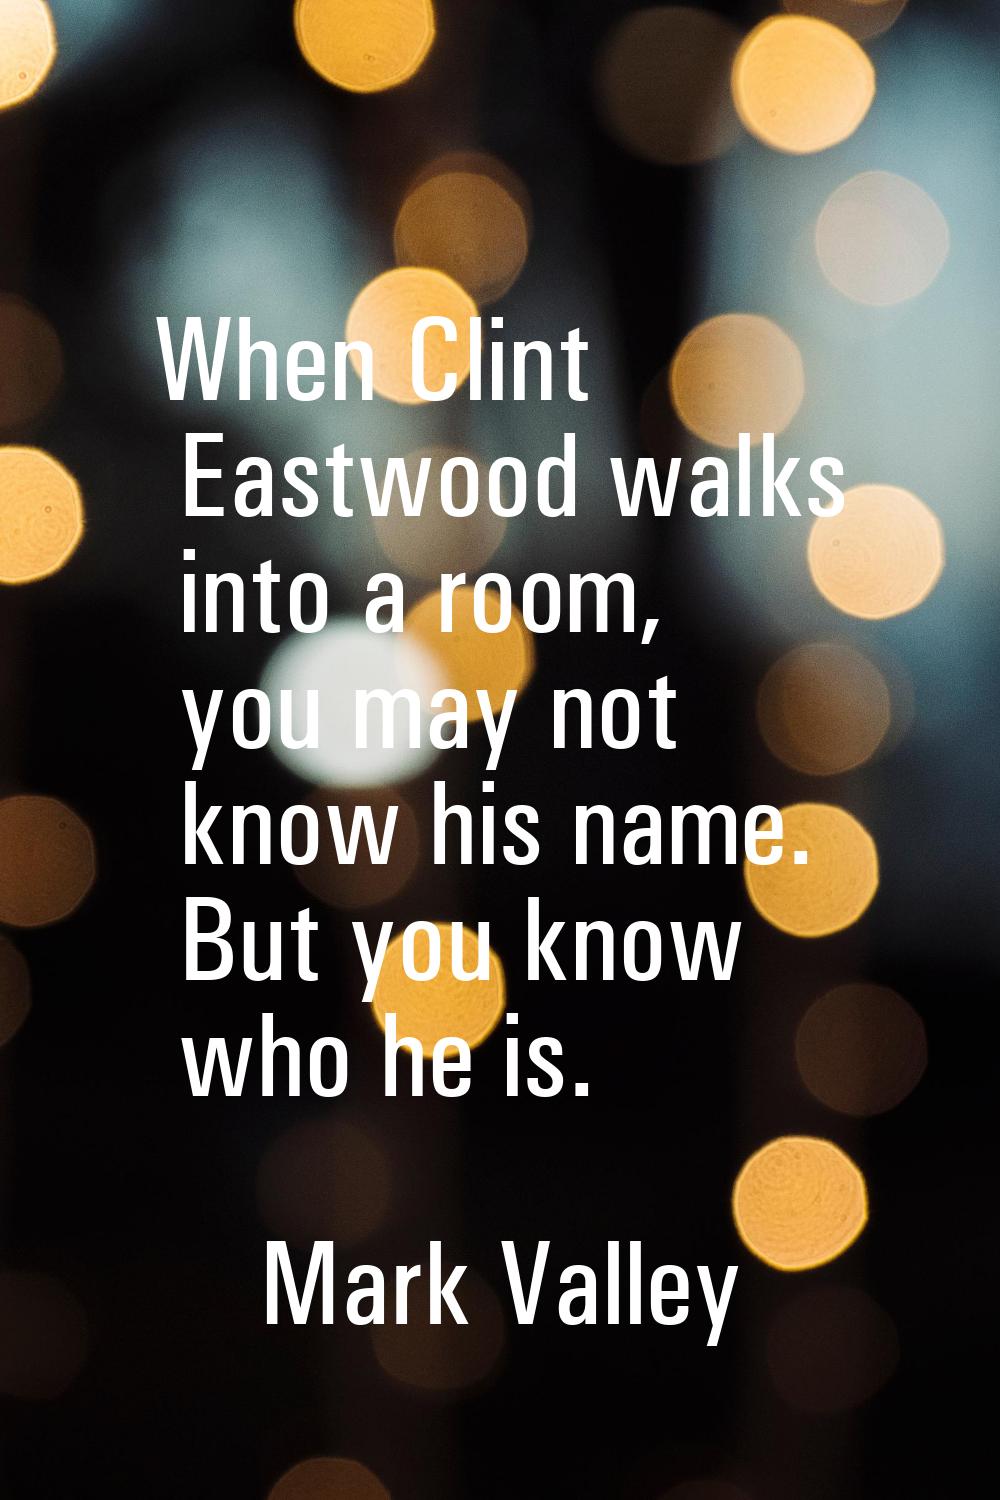 When Clint Eastwood walks into a room, you may not know his name. But you know who he is.